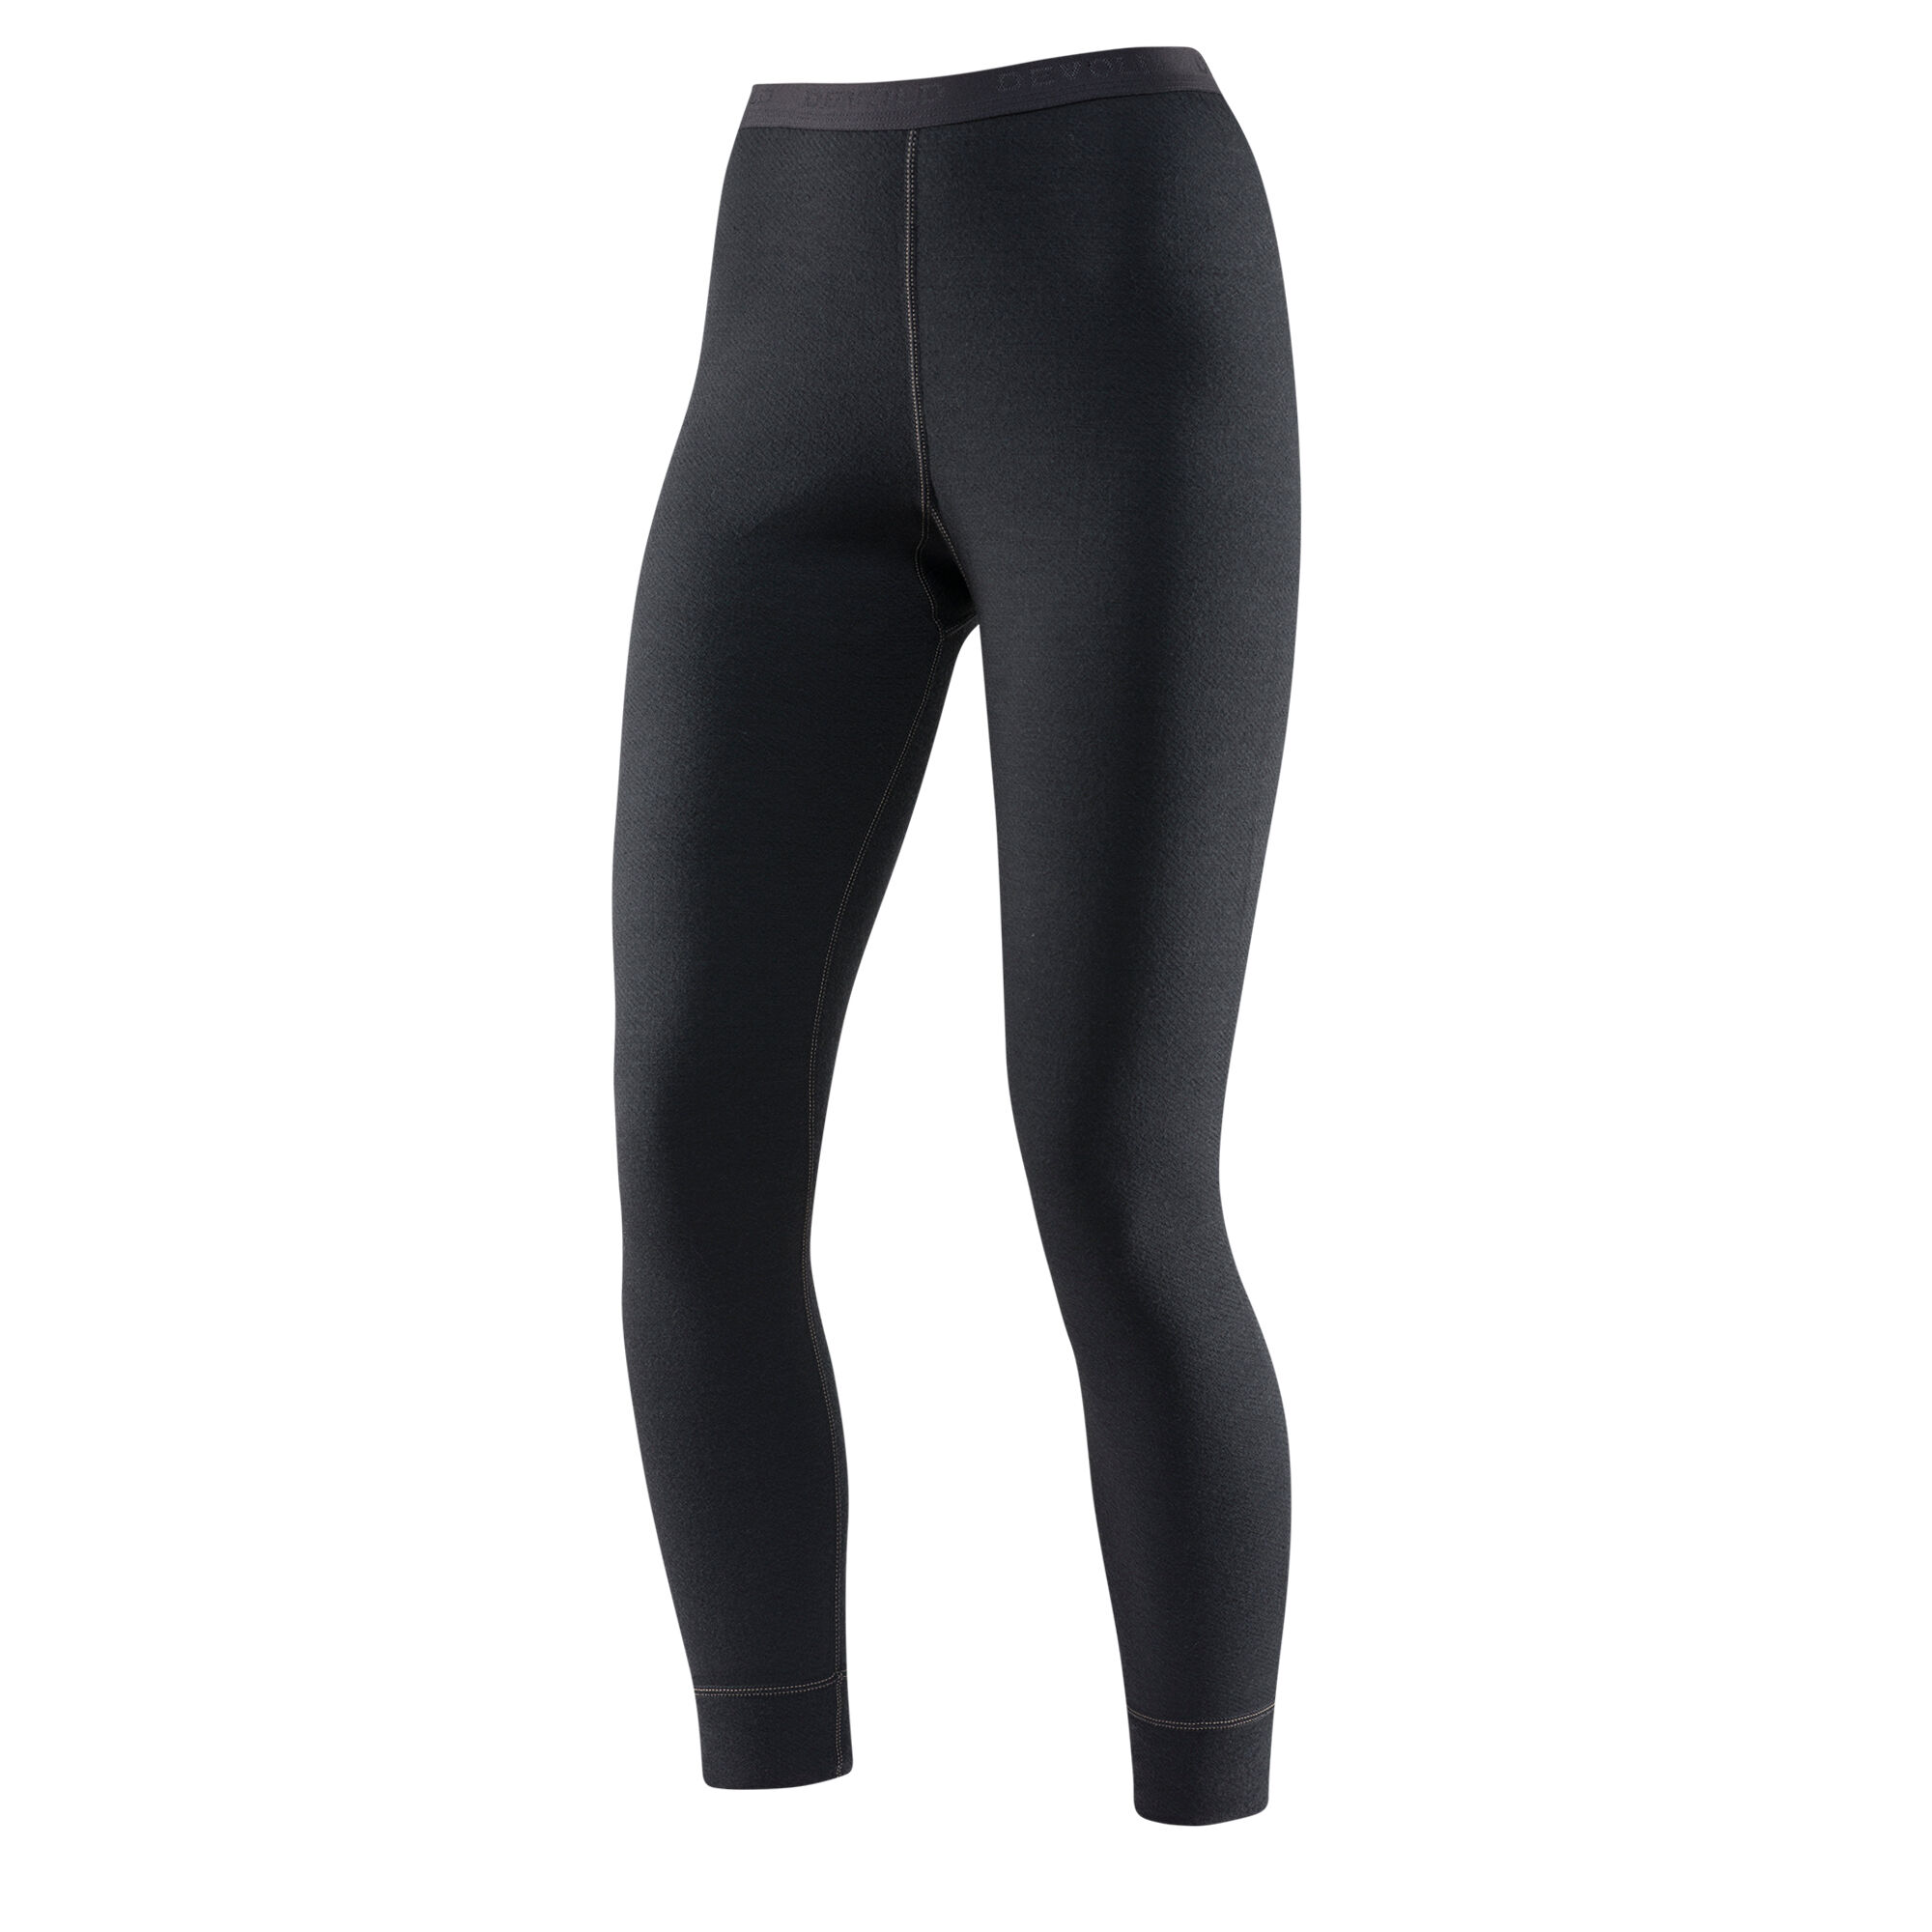 Devold Expedition Long Johns - Base layer - Women's